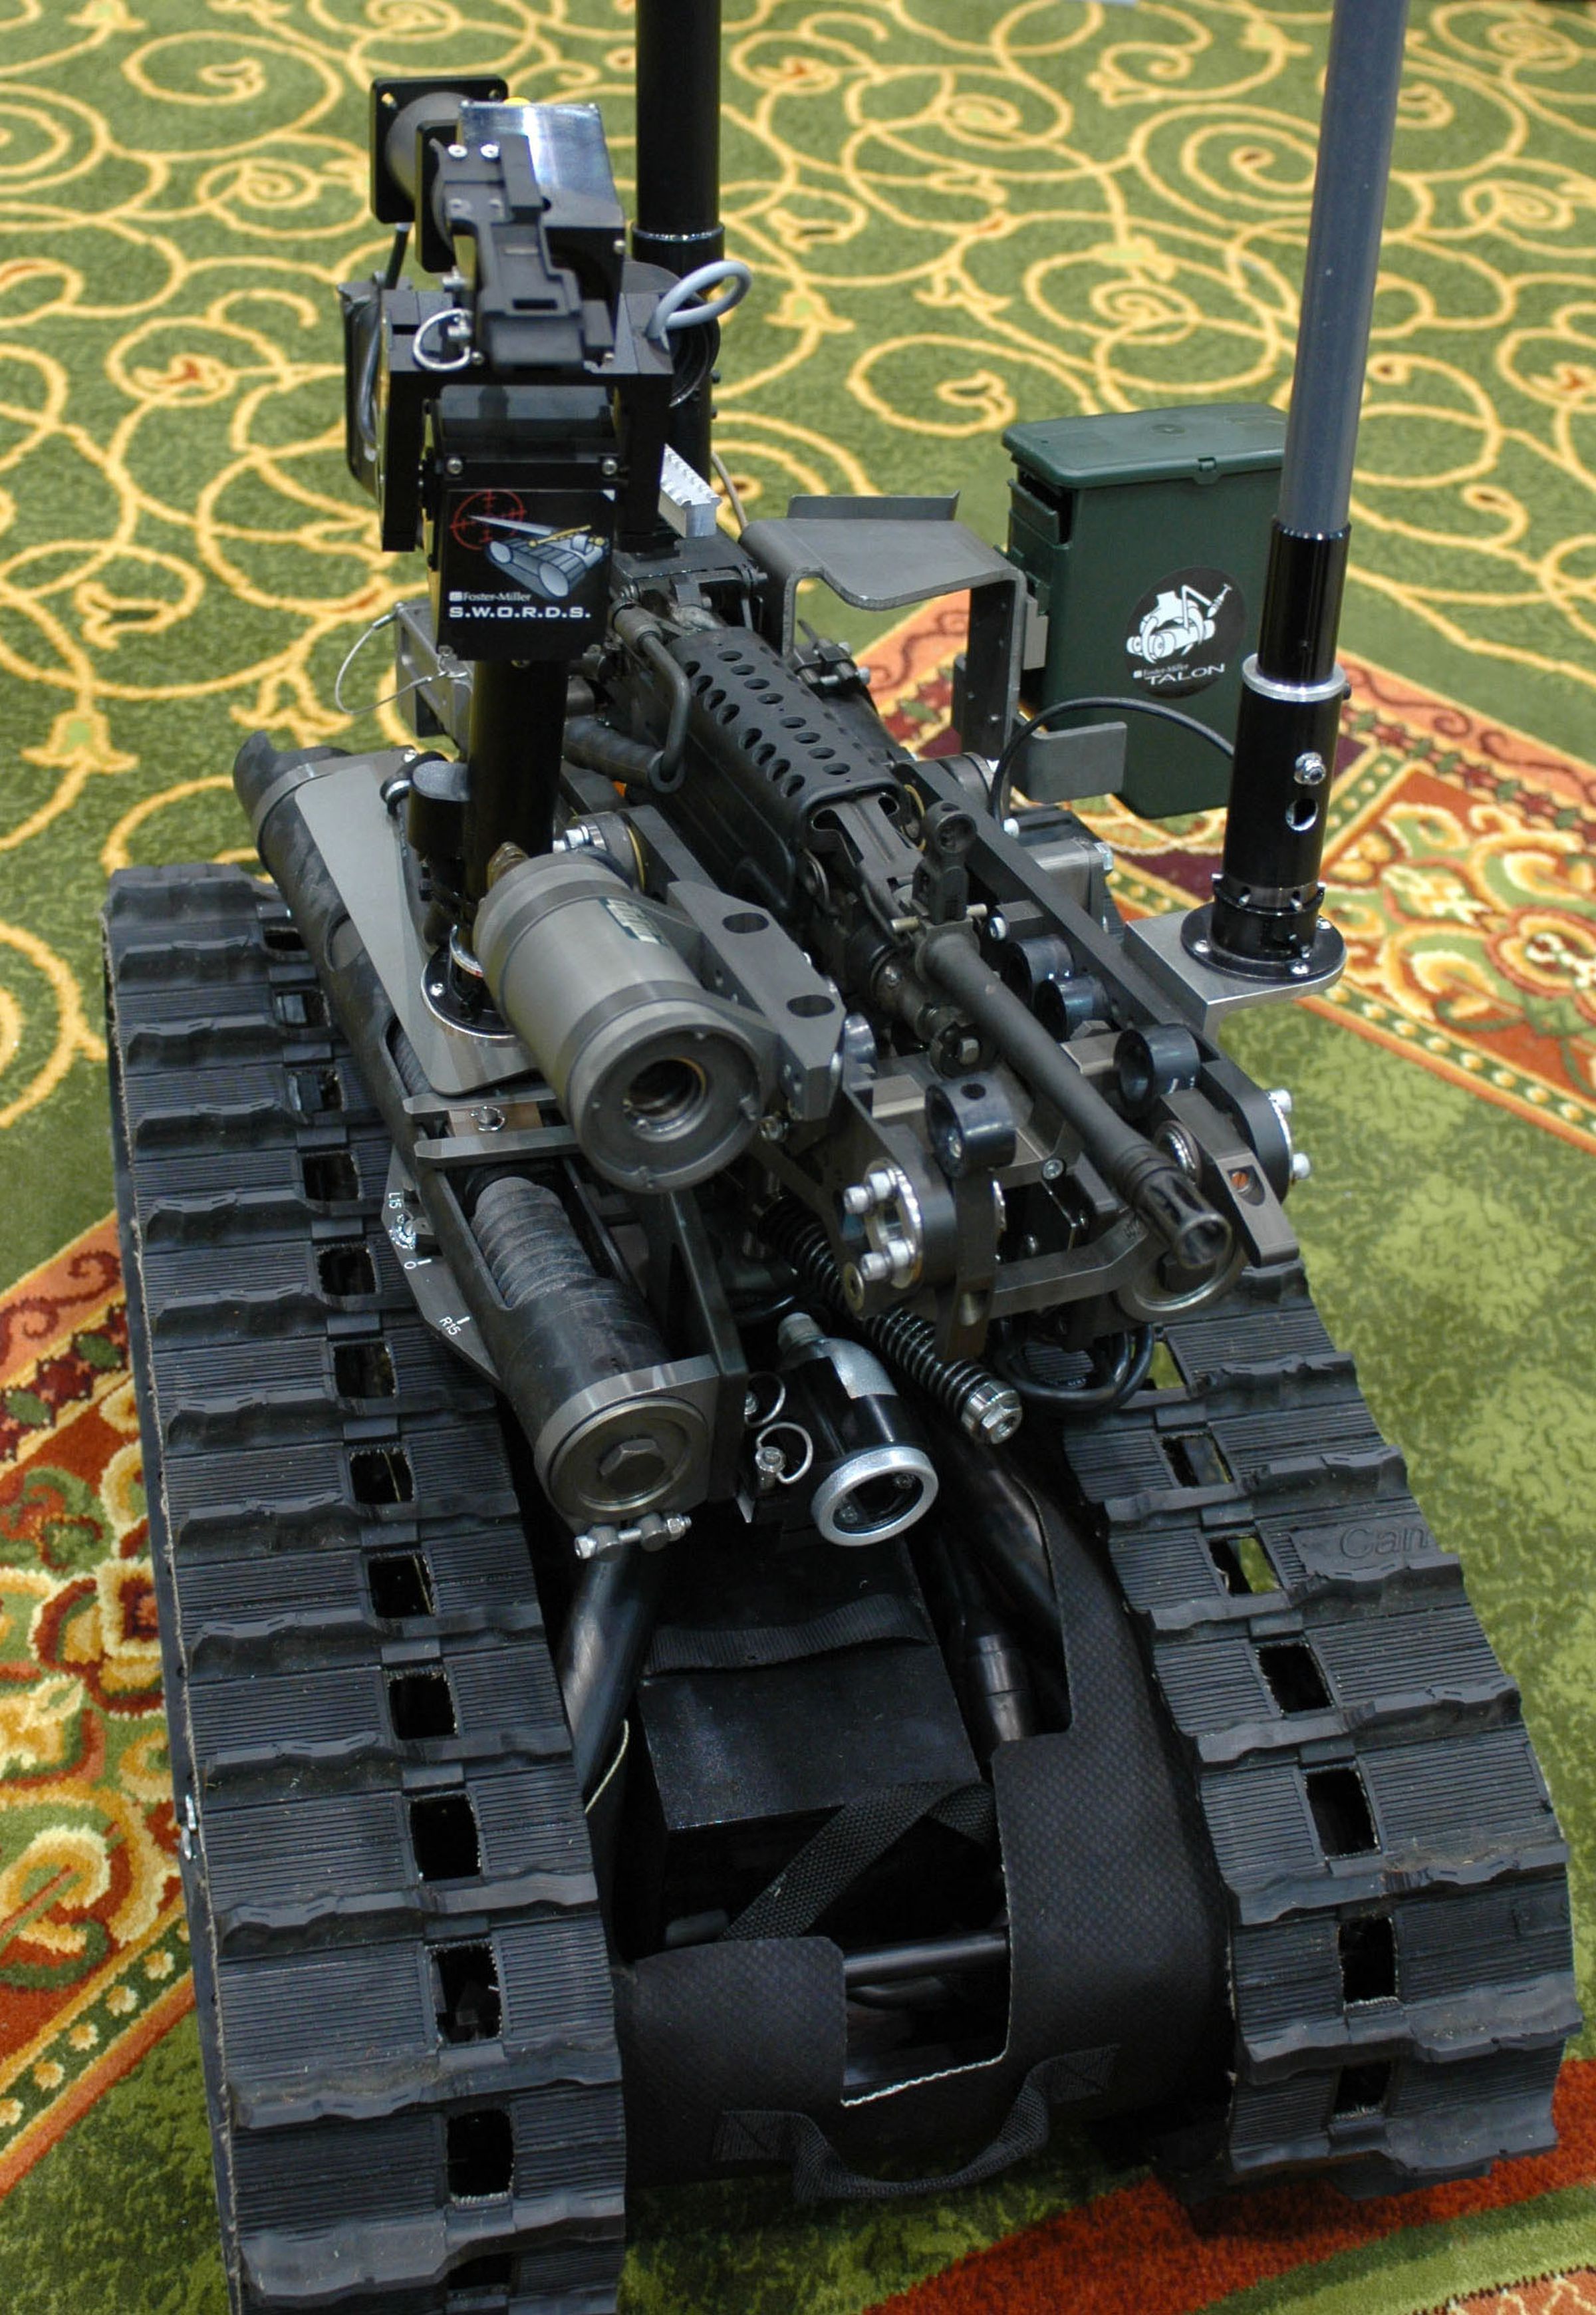 A machine gun mounted to the same type of Talon robot owned by the SFPD.